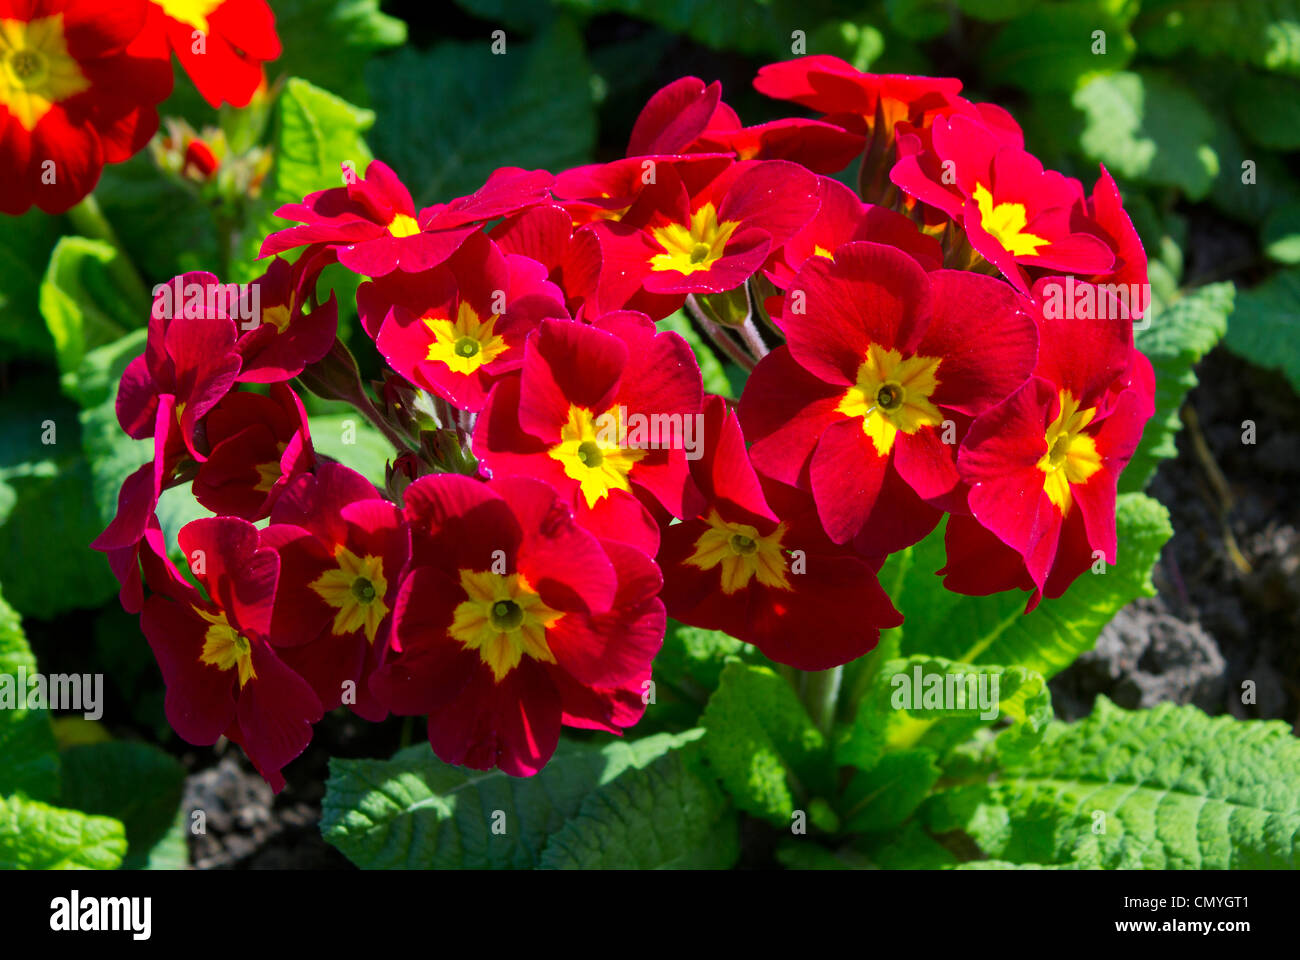 Red pansies in bloom Stock Photo